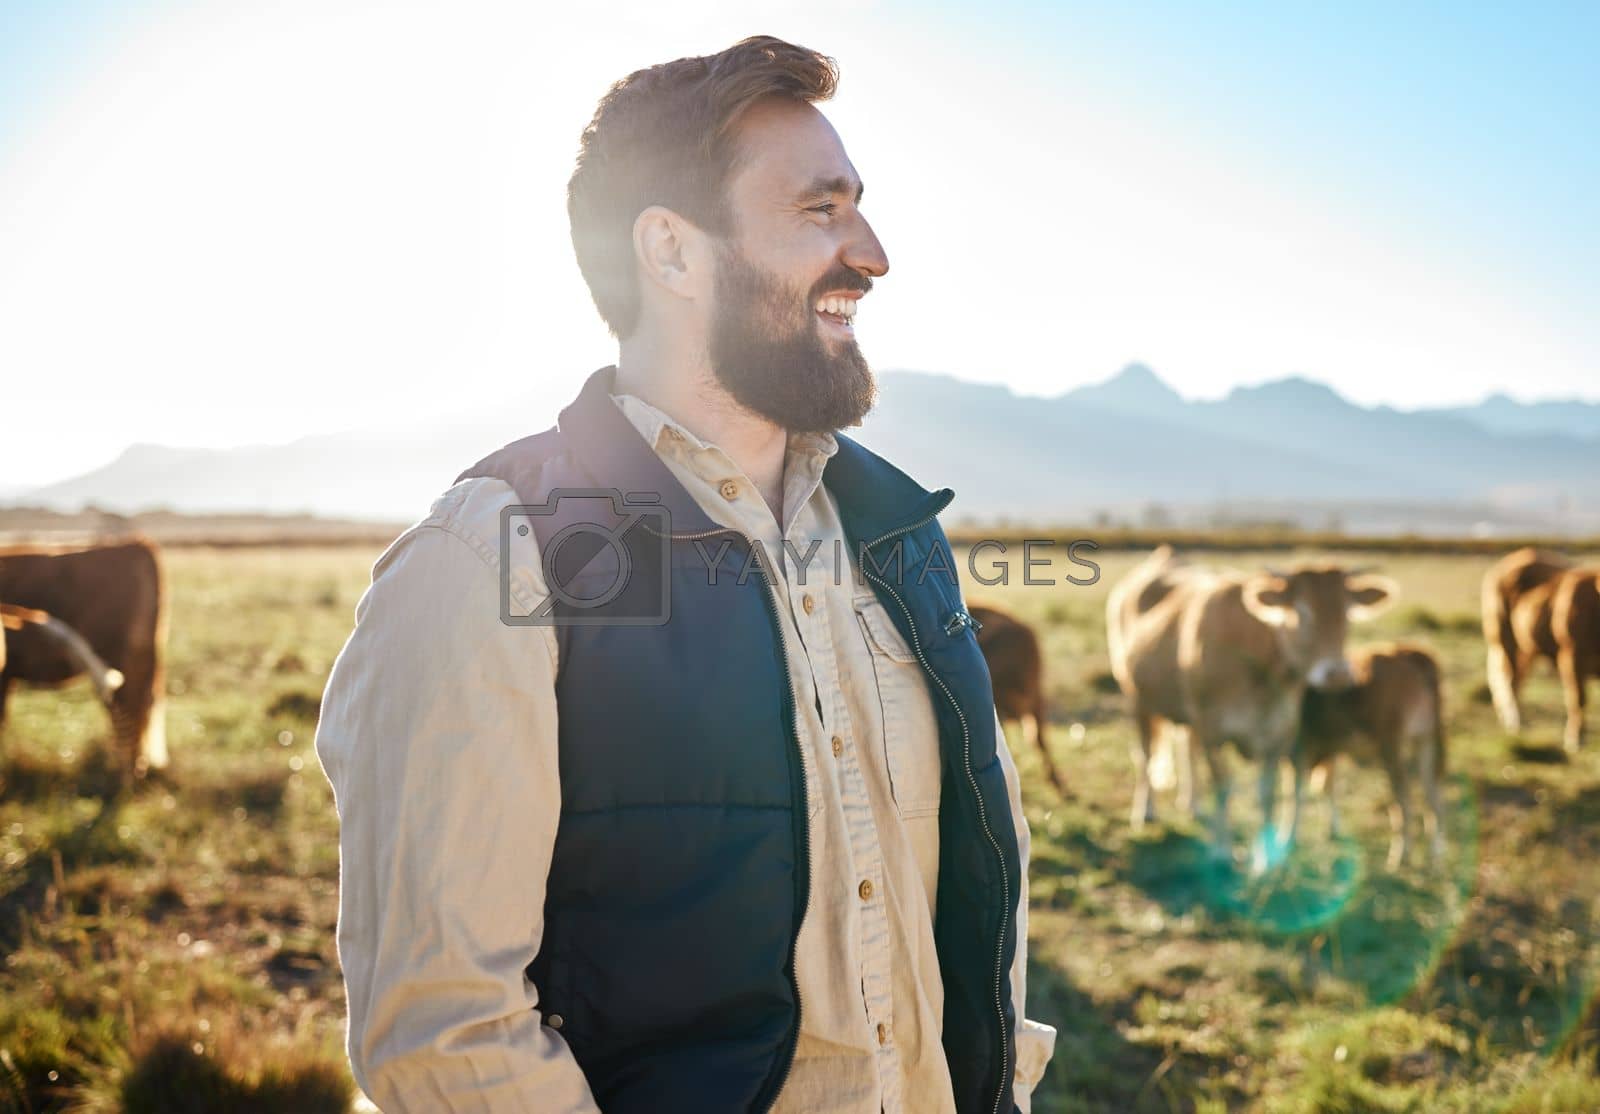 Royalty free image of Sustainability, farming and man with cows on field, happy farmer in countryside with mountains, dairy and beef production. Nature, meat and milk farm, sustainable business in eco agriculture and food by YuriArcurs